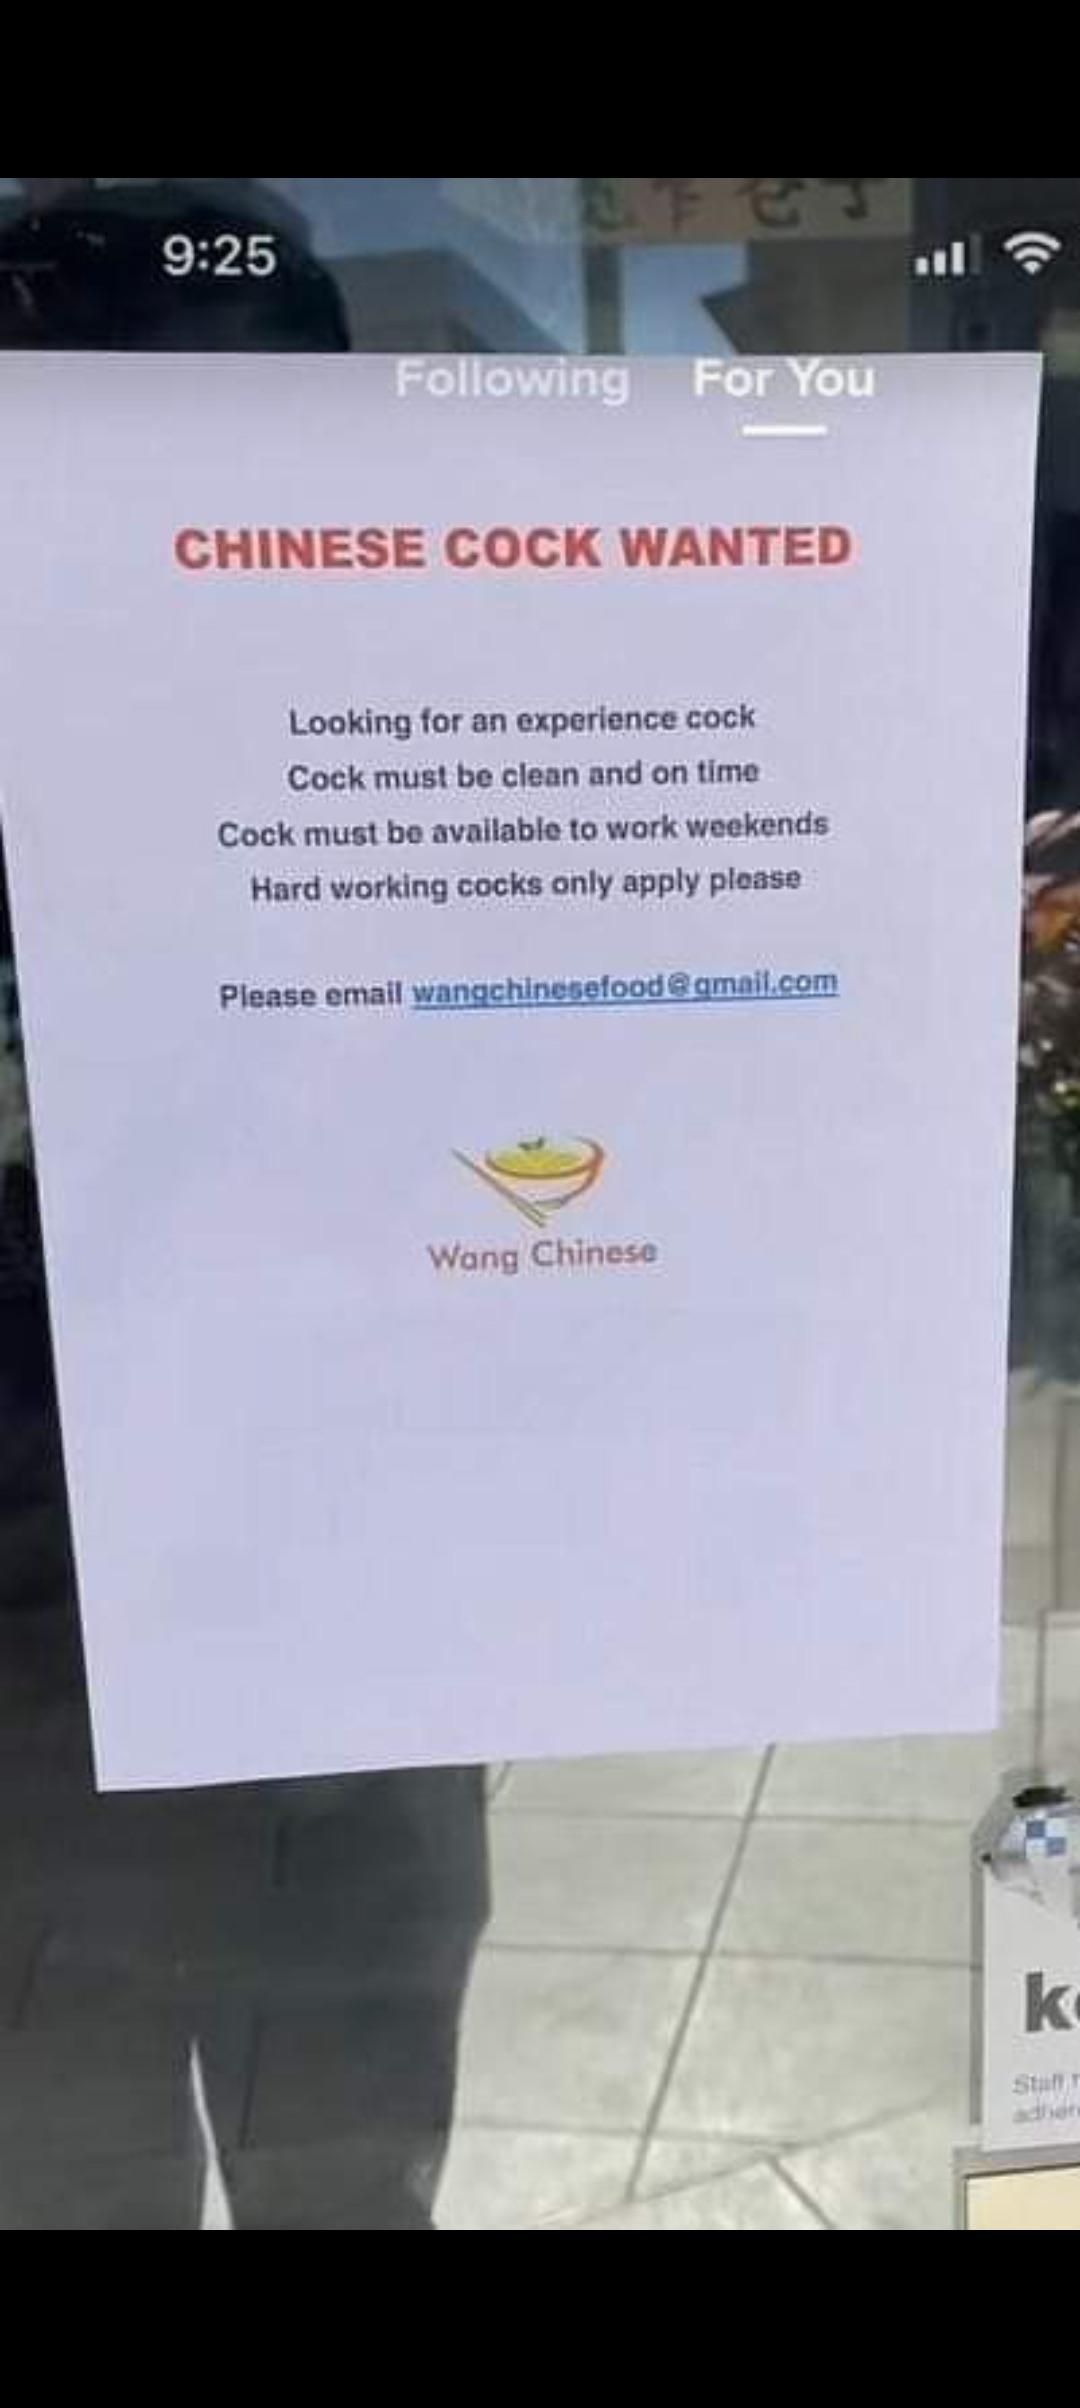 Anyone want to apply?